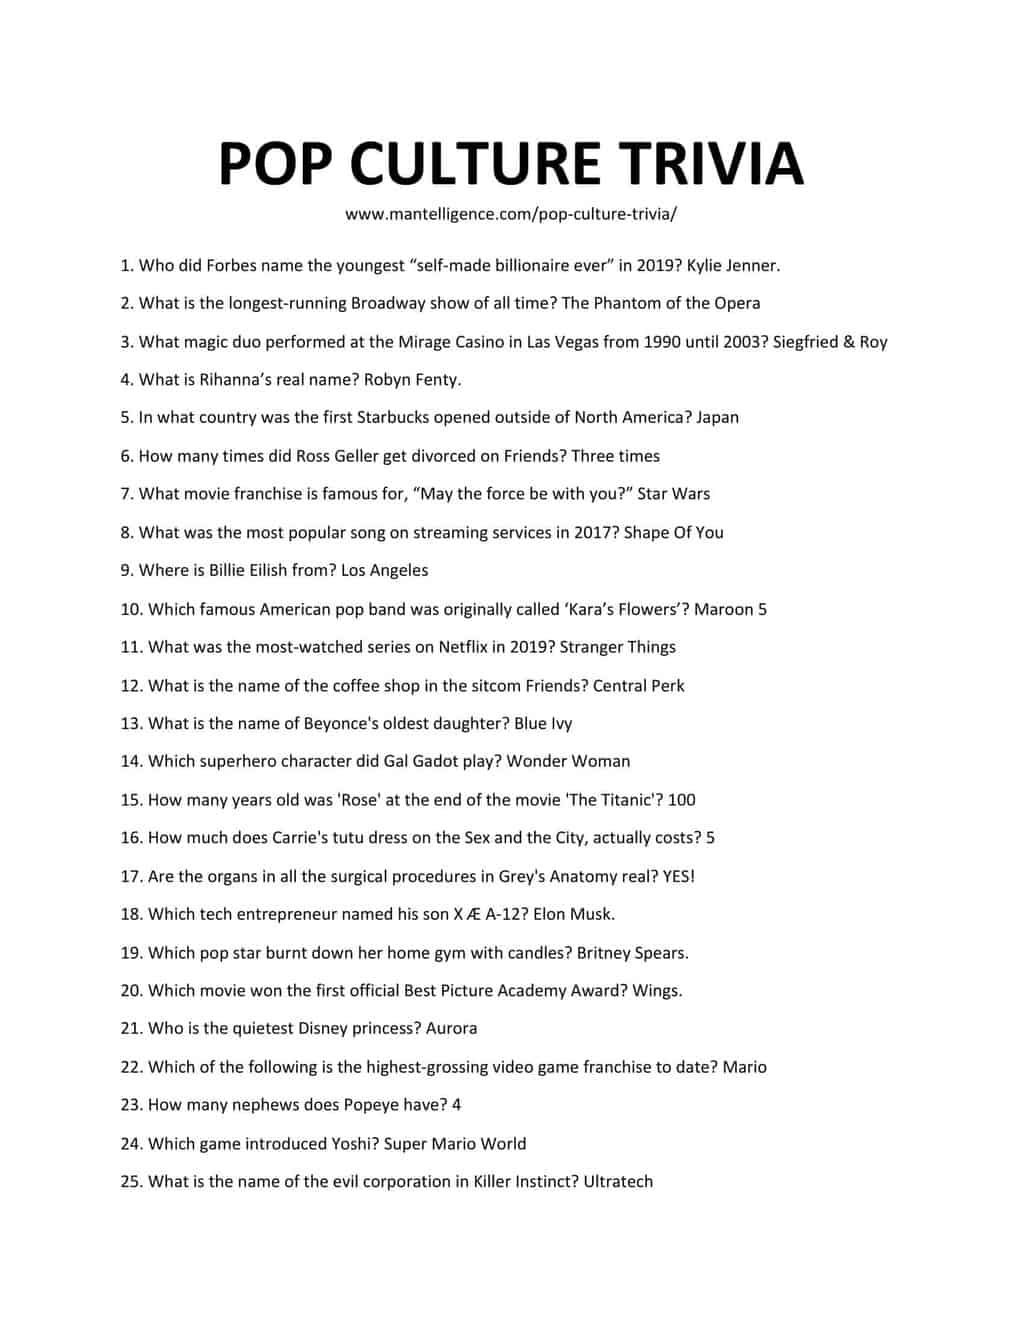 pop-culture-trivia-questions-and-answers-printable-challenge-your